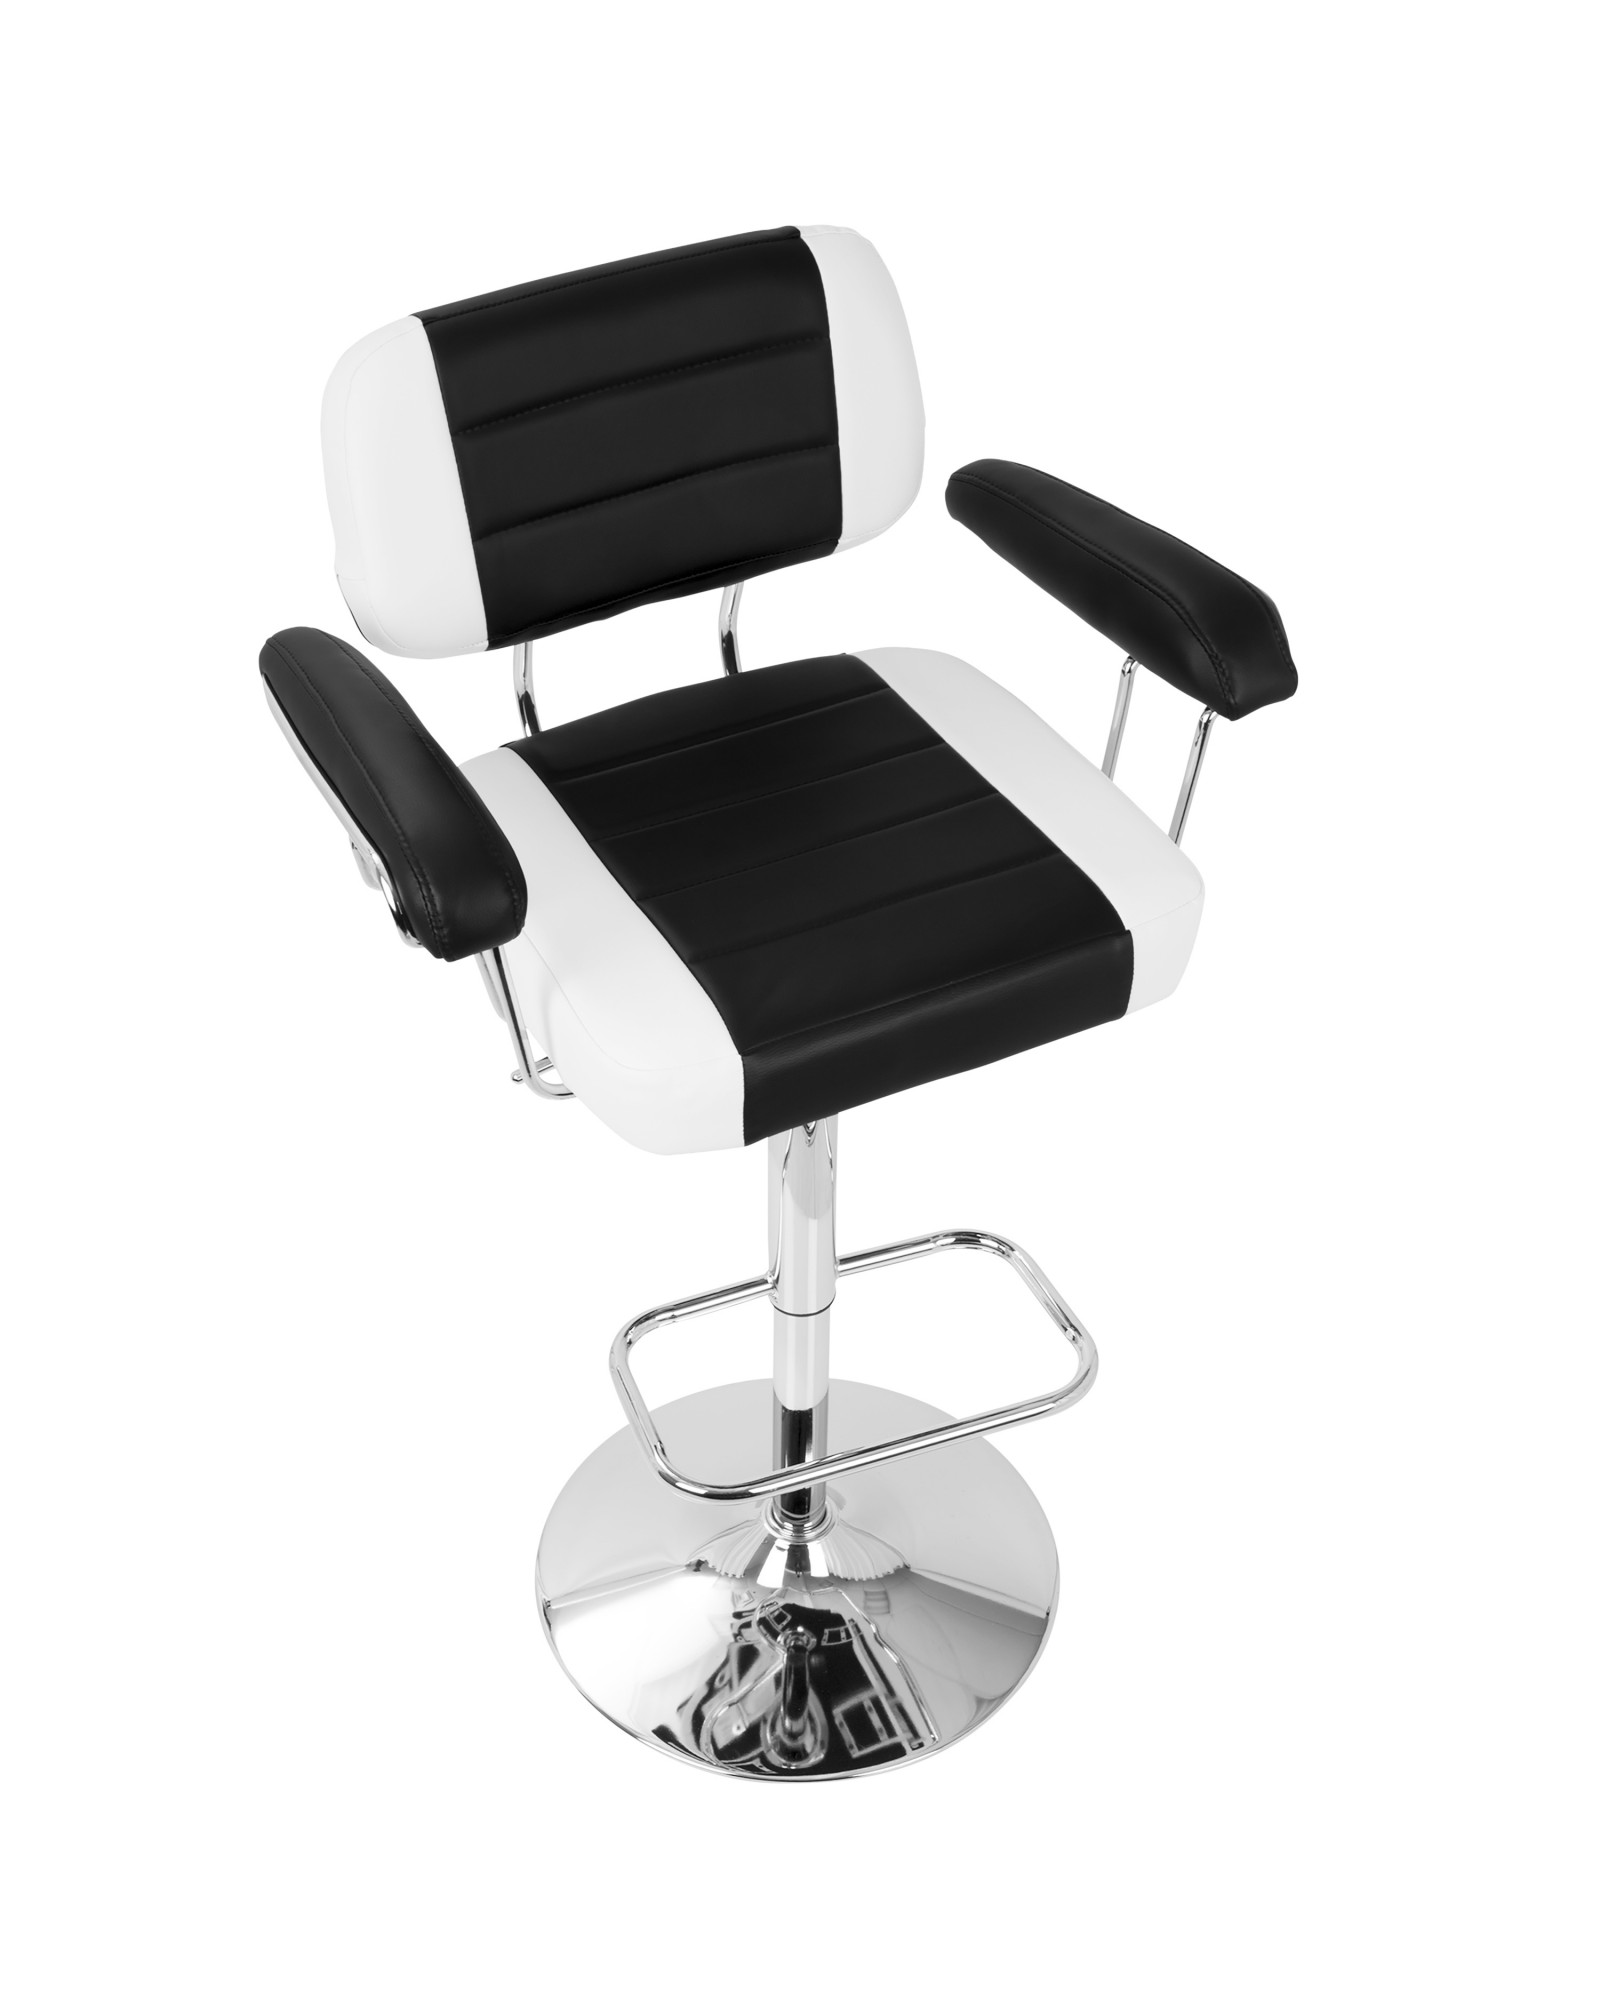 Cruiser Contemporary Adjustable Barstool in Black and White Faux Leather